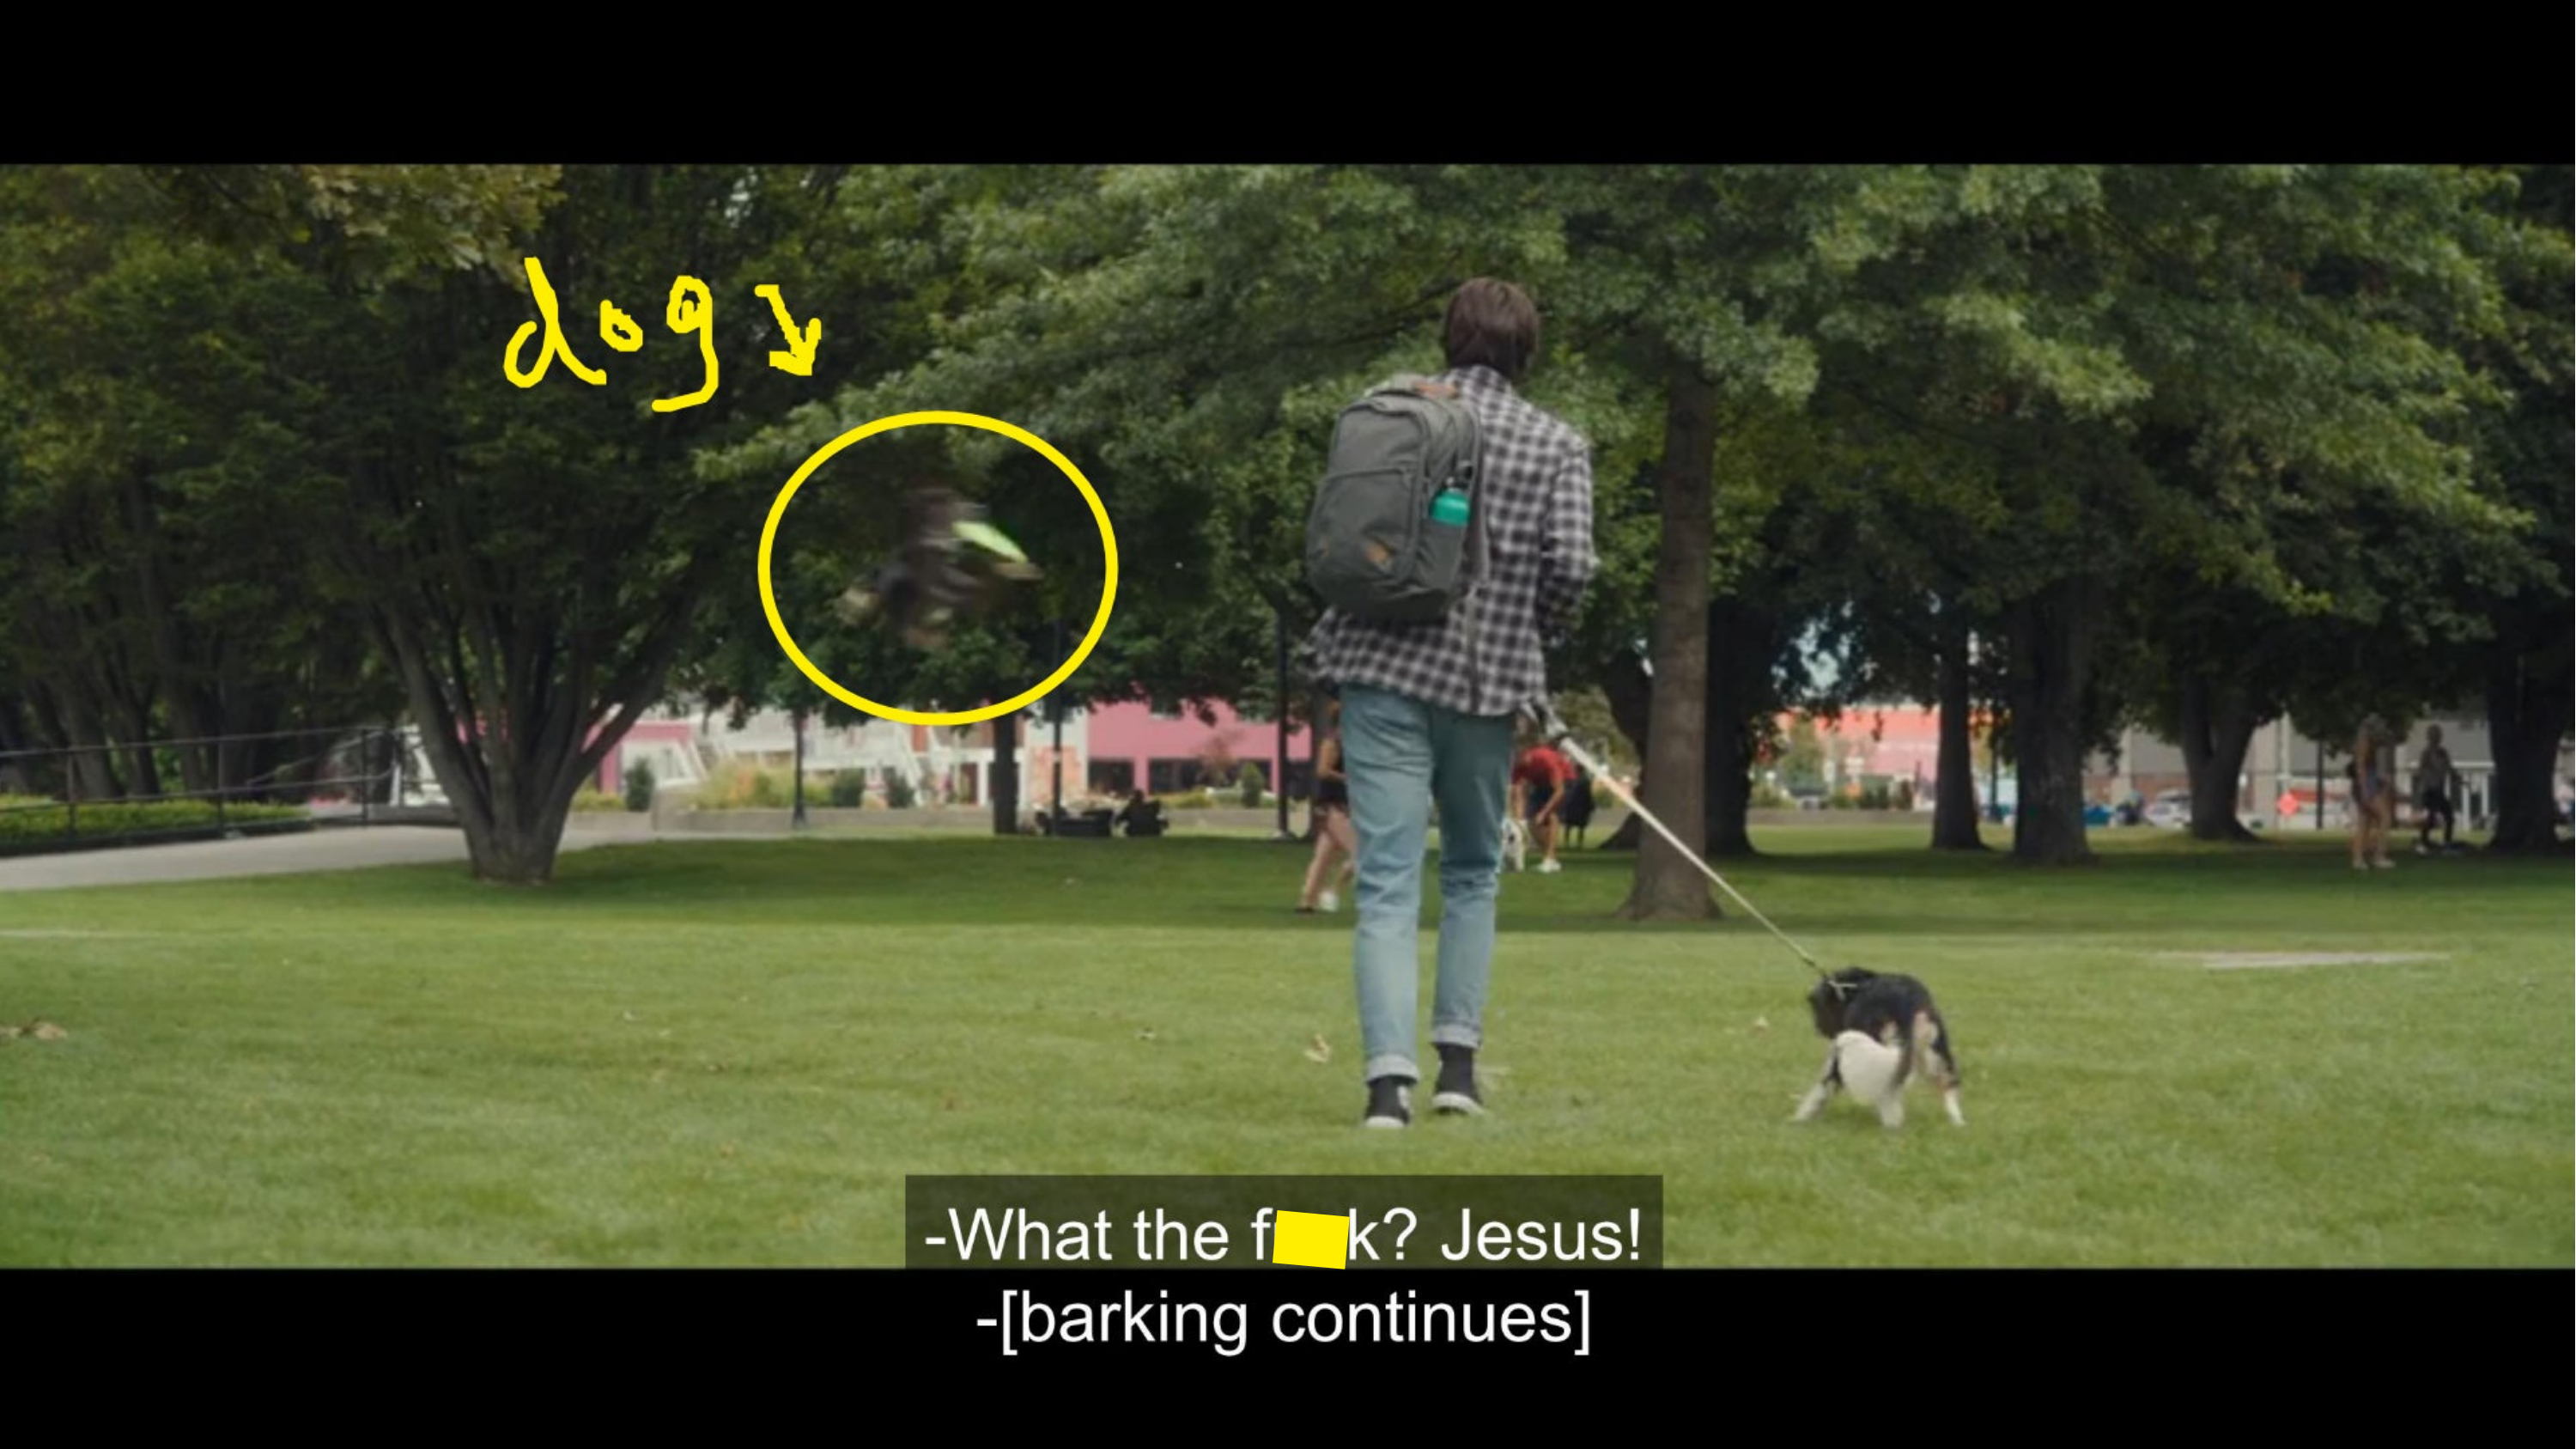 man with dog at park ducks, says &#x27;what the fuck? jesus!&#x27; as dog with frisbee spins through the air in front of him. caption &#x27;[barking continues]&#x27; it is a scene of chaos